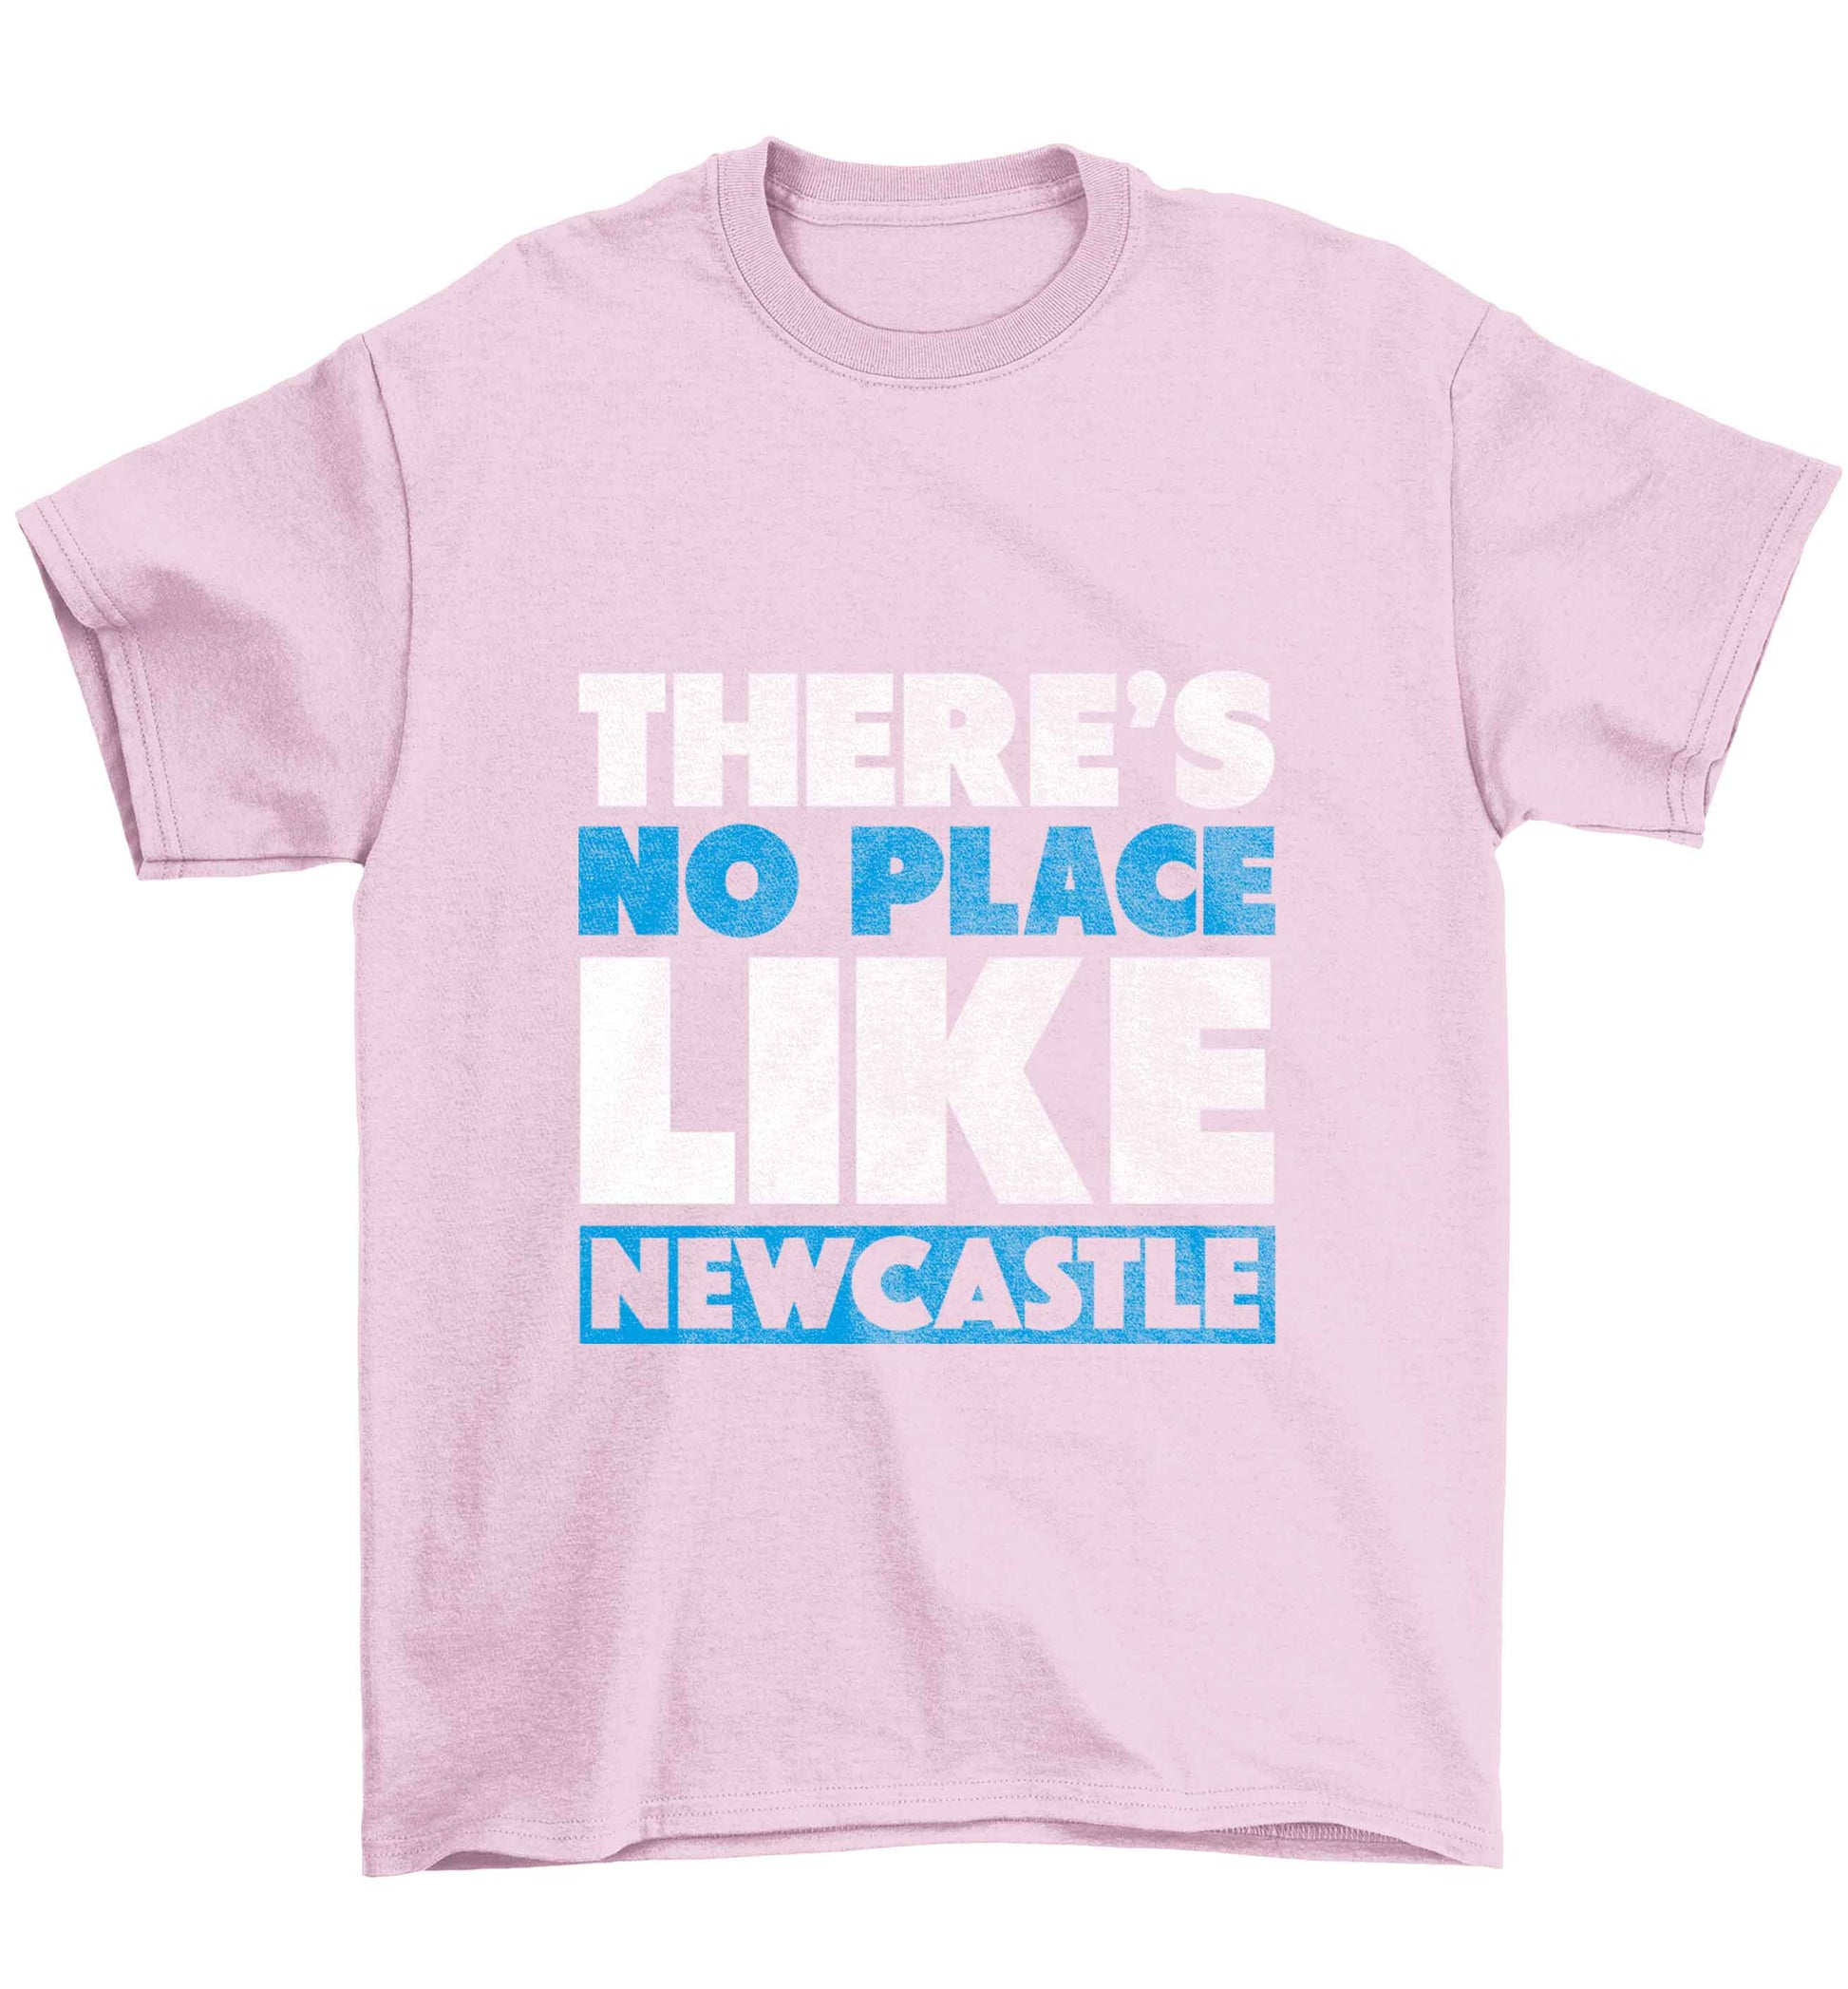 There's no place like Newcastle Children's light pink Tshirt 12-13 Years